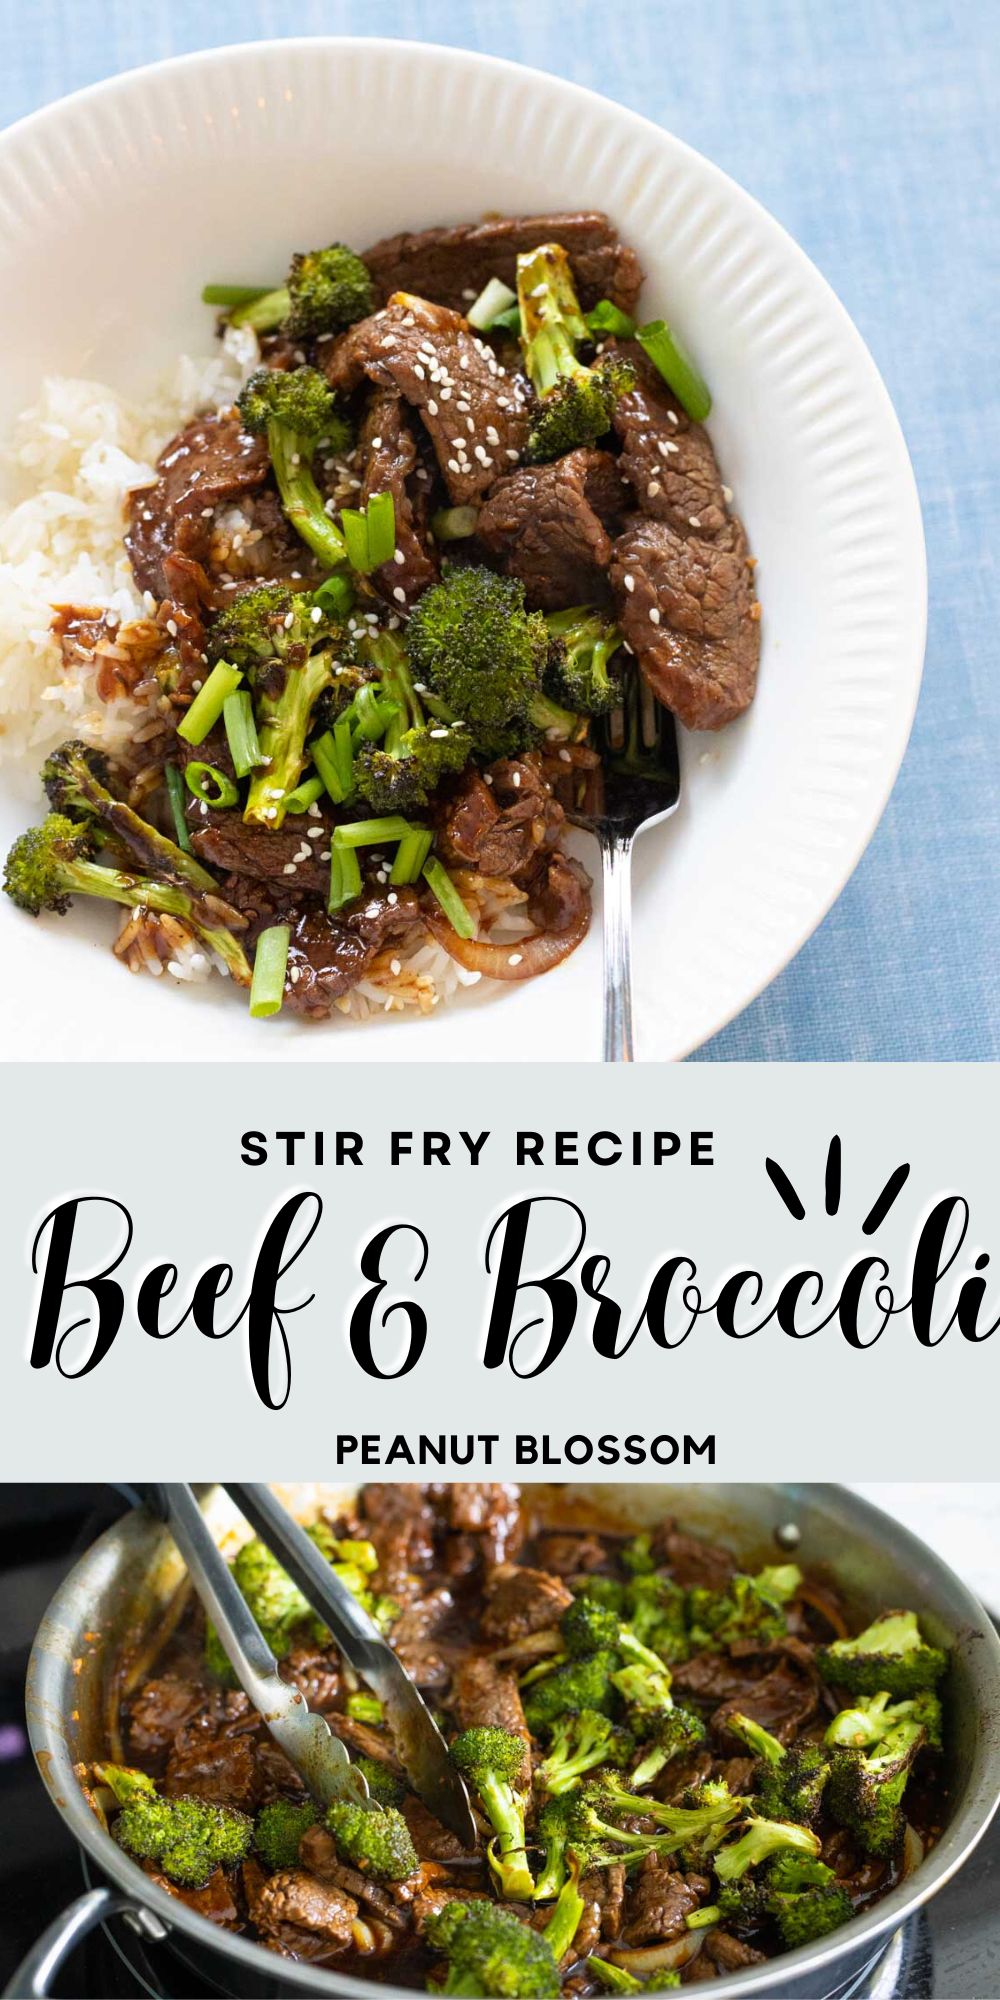 The photo collage shows the bowl of beef and broccoli over a bed of white rice next to a photo of the stir fry mix in the skillet on the stovetop.